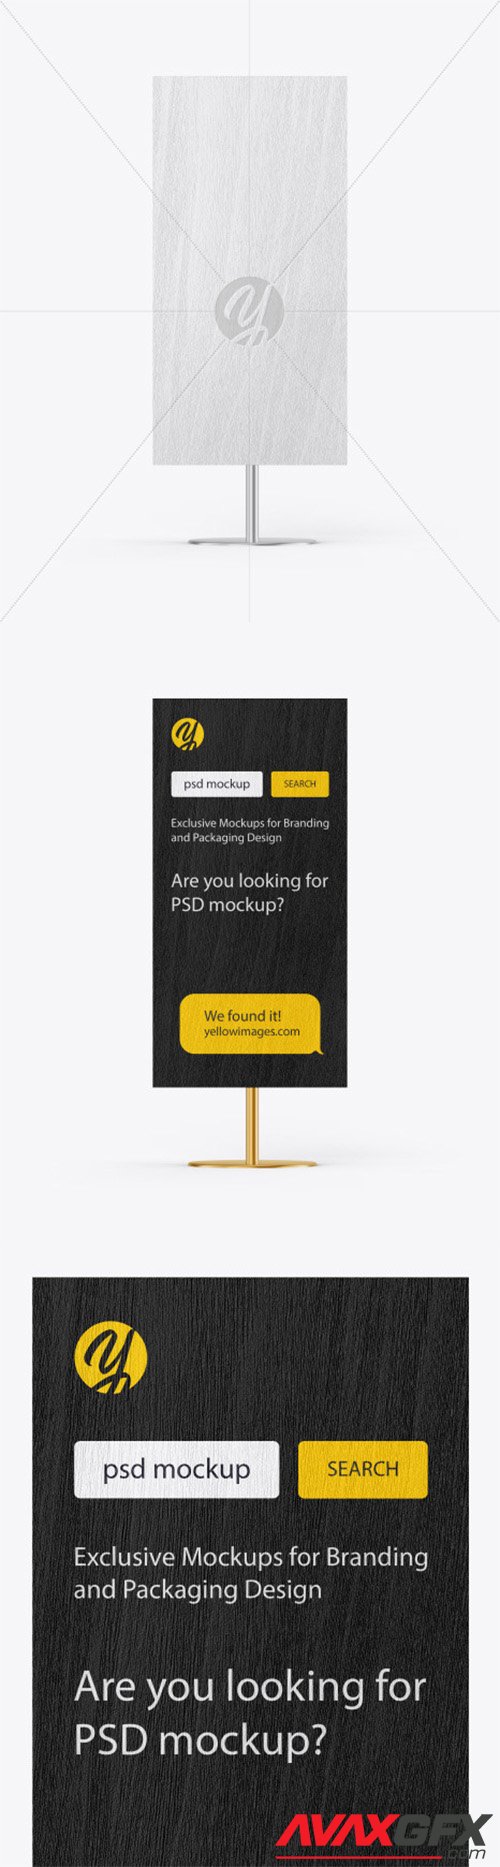 Download Download Mockups Apparel Device Packaging Stationery Mockups Vehicles Outdoor Advertising Yellowimages Mockups